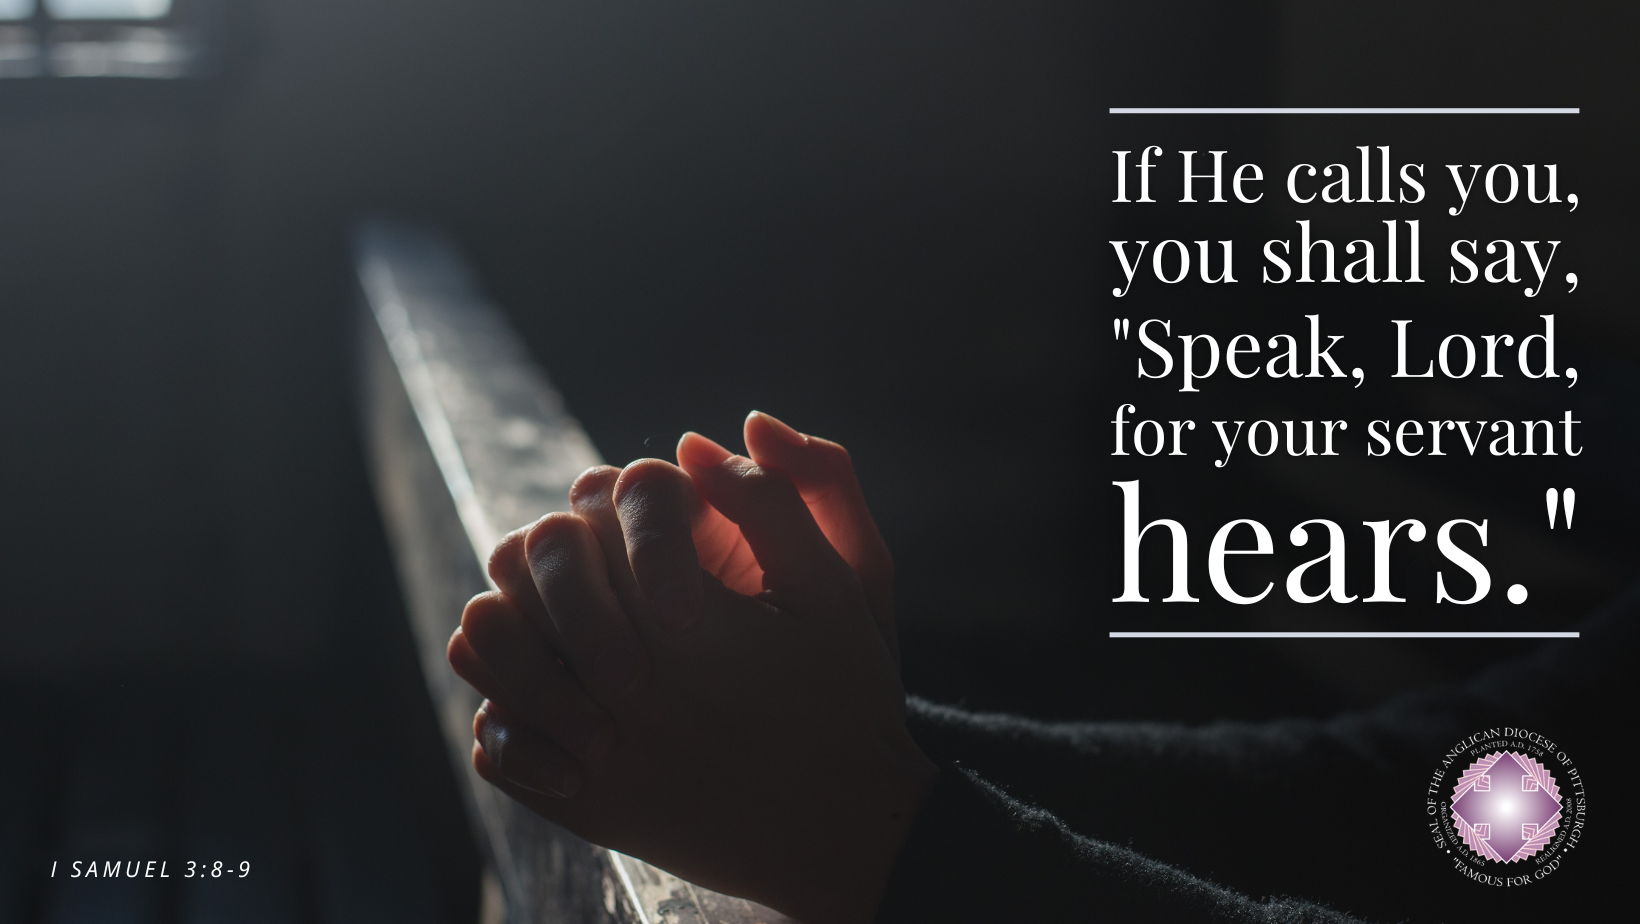 If He calls you, you shall say, "Speak, Lord, for your servant hears."